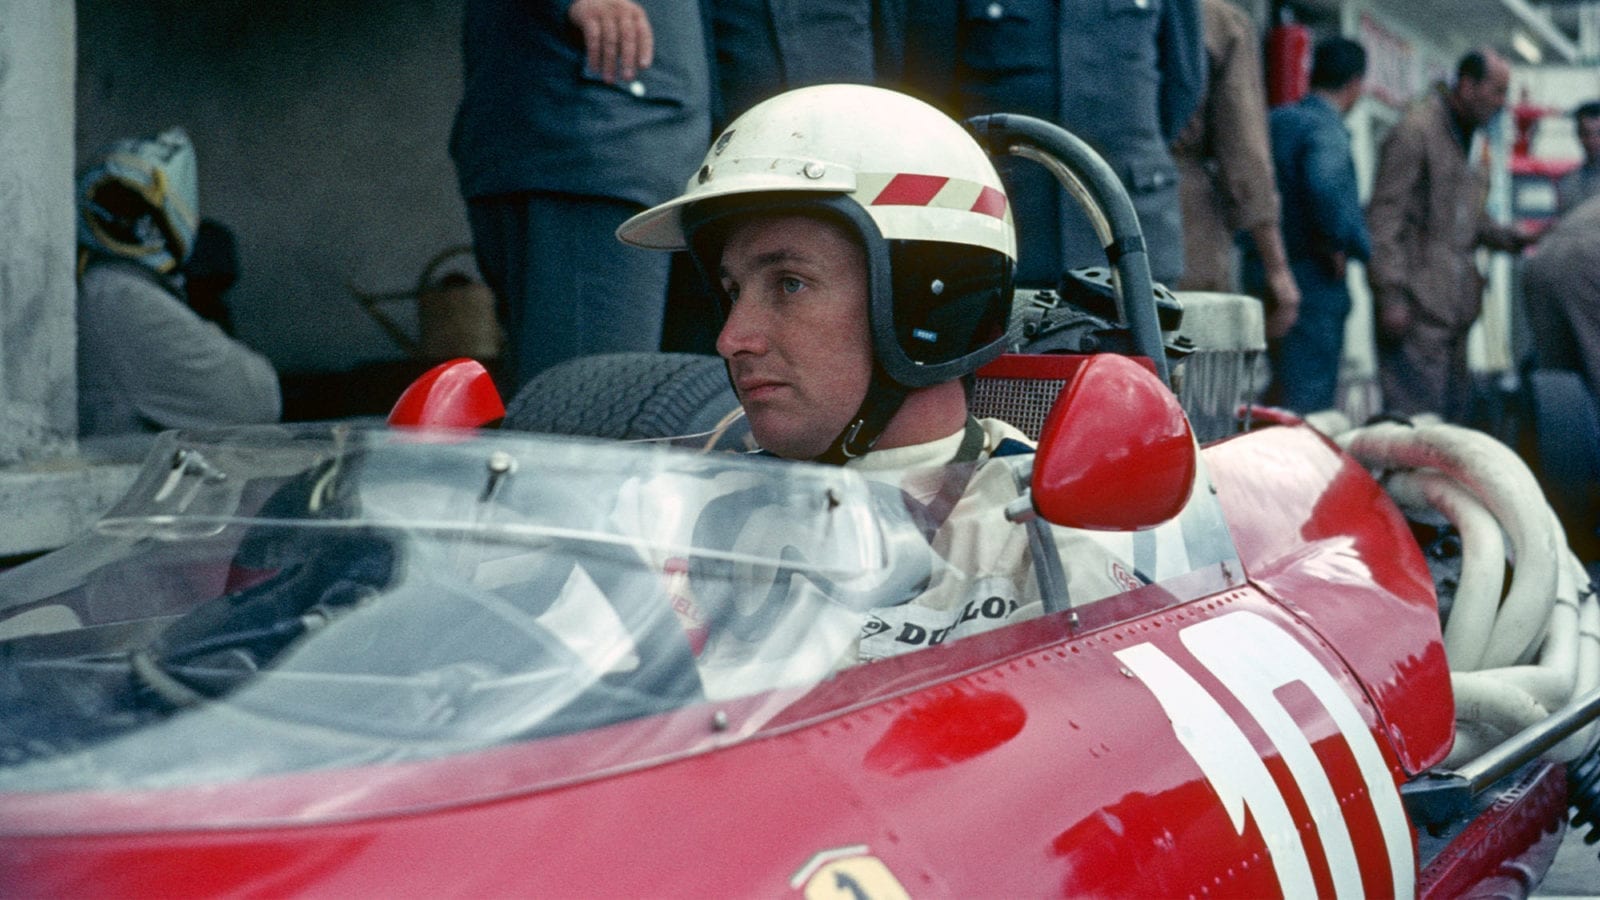 Mike Parkes (Ferrari) in the pits during practice for the 1966 German Grand Prix at the Nurburgring. Photo: Grand Prix Photo